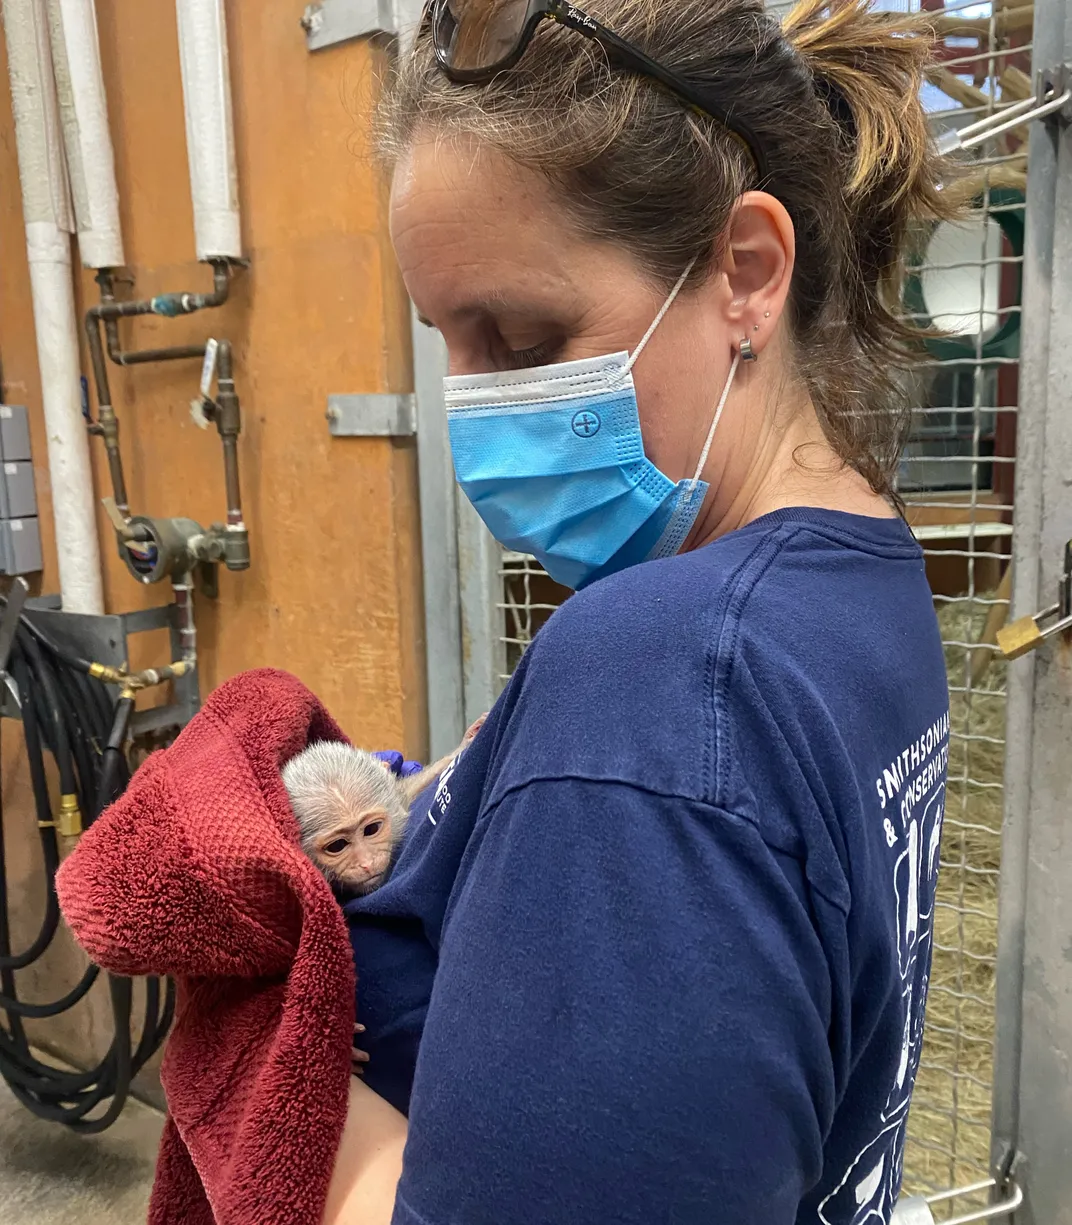 An animal care staffer wearing personal protective equipment swaddles a baby monkey in a red blanket.